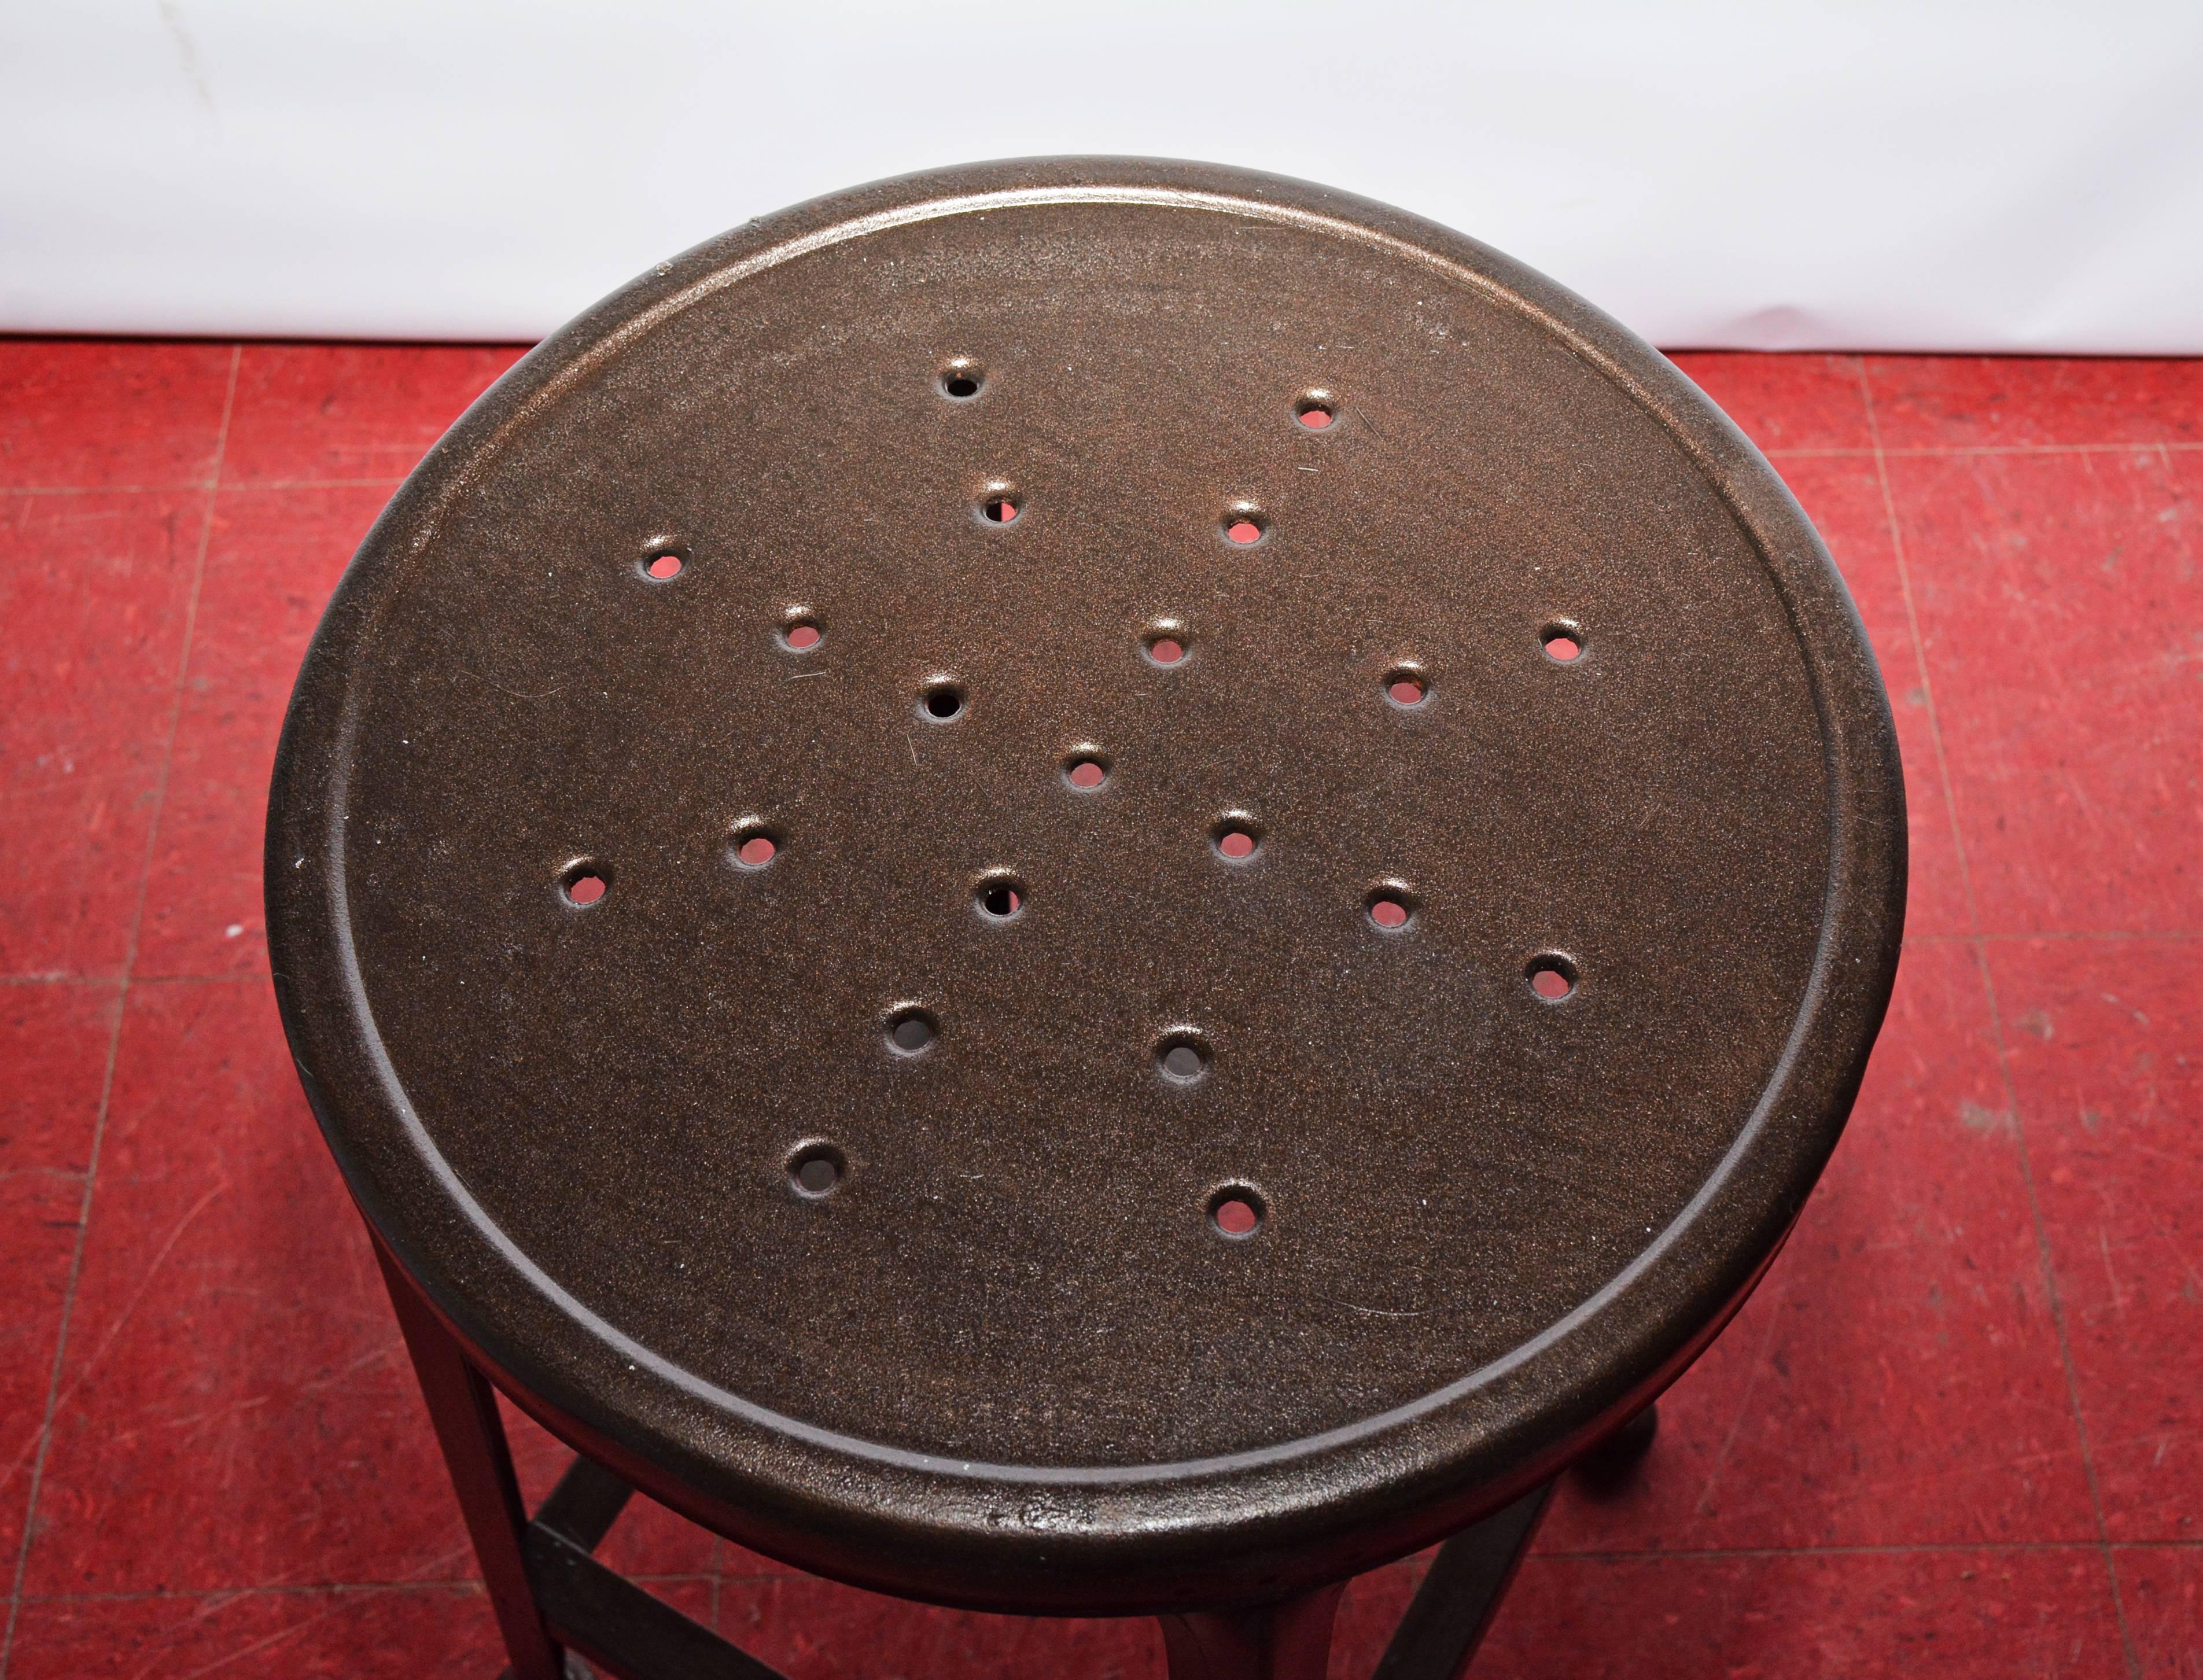 The iron stool has a perforated seat and legs with stretchers and padded fe.

Measures: Seat diameter 14.50.